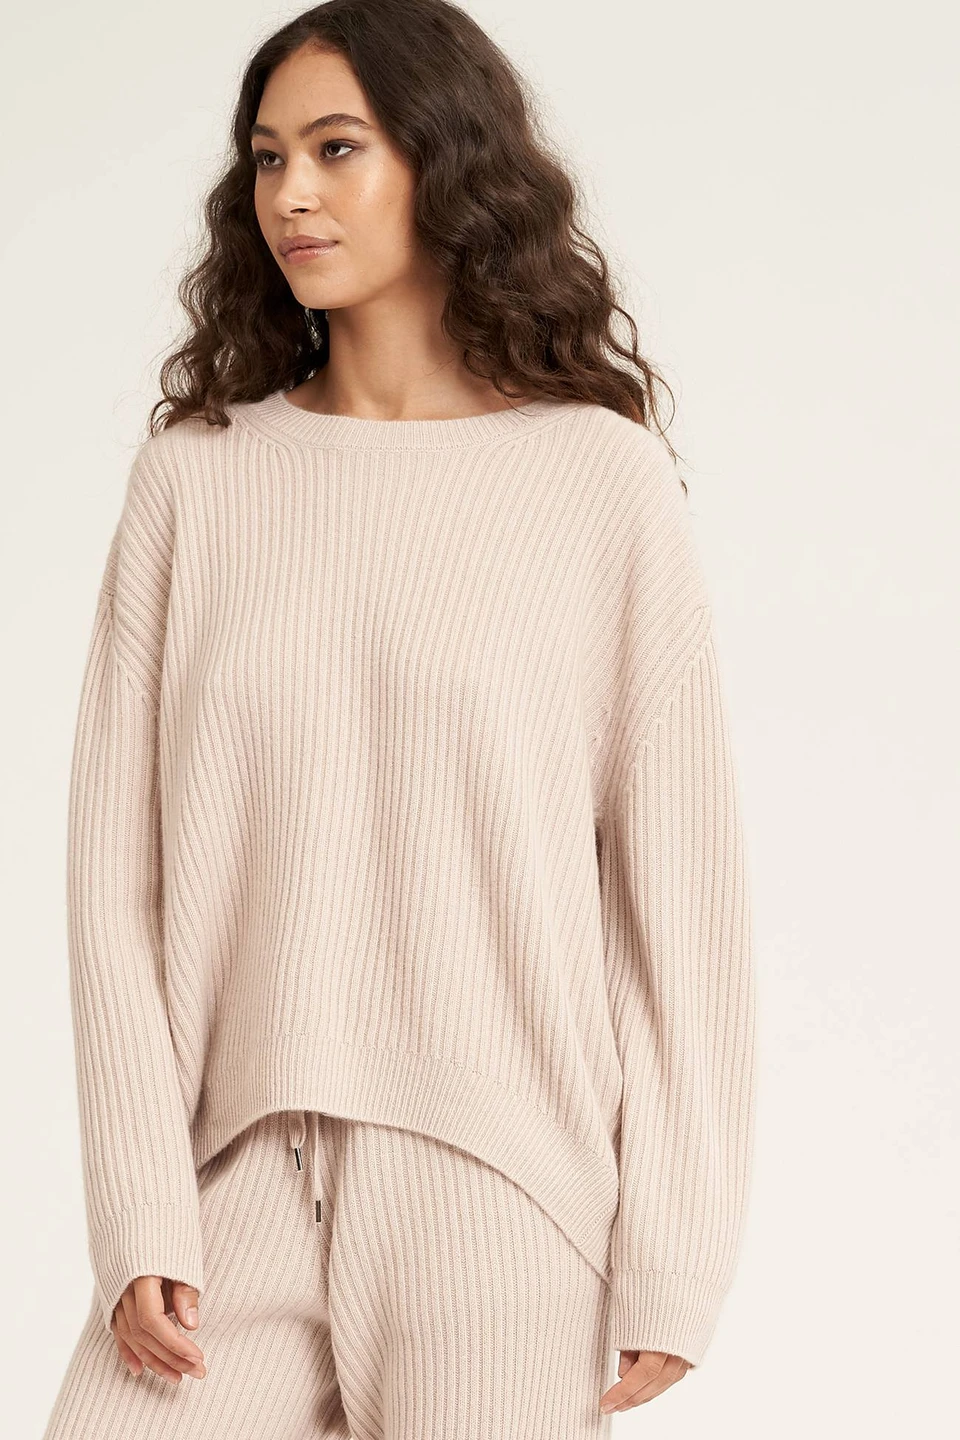 Naked Cashmere + Campbell Sweater